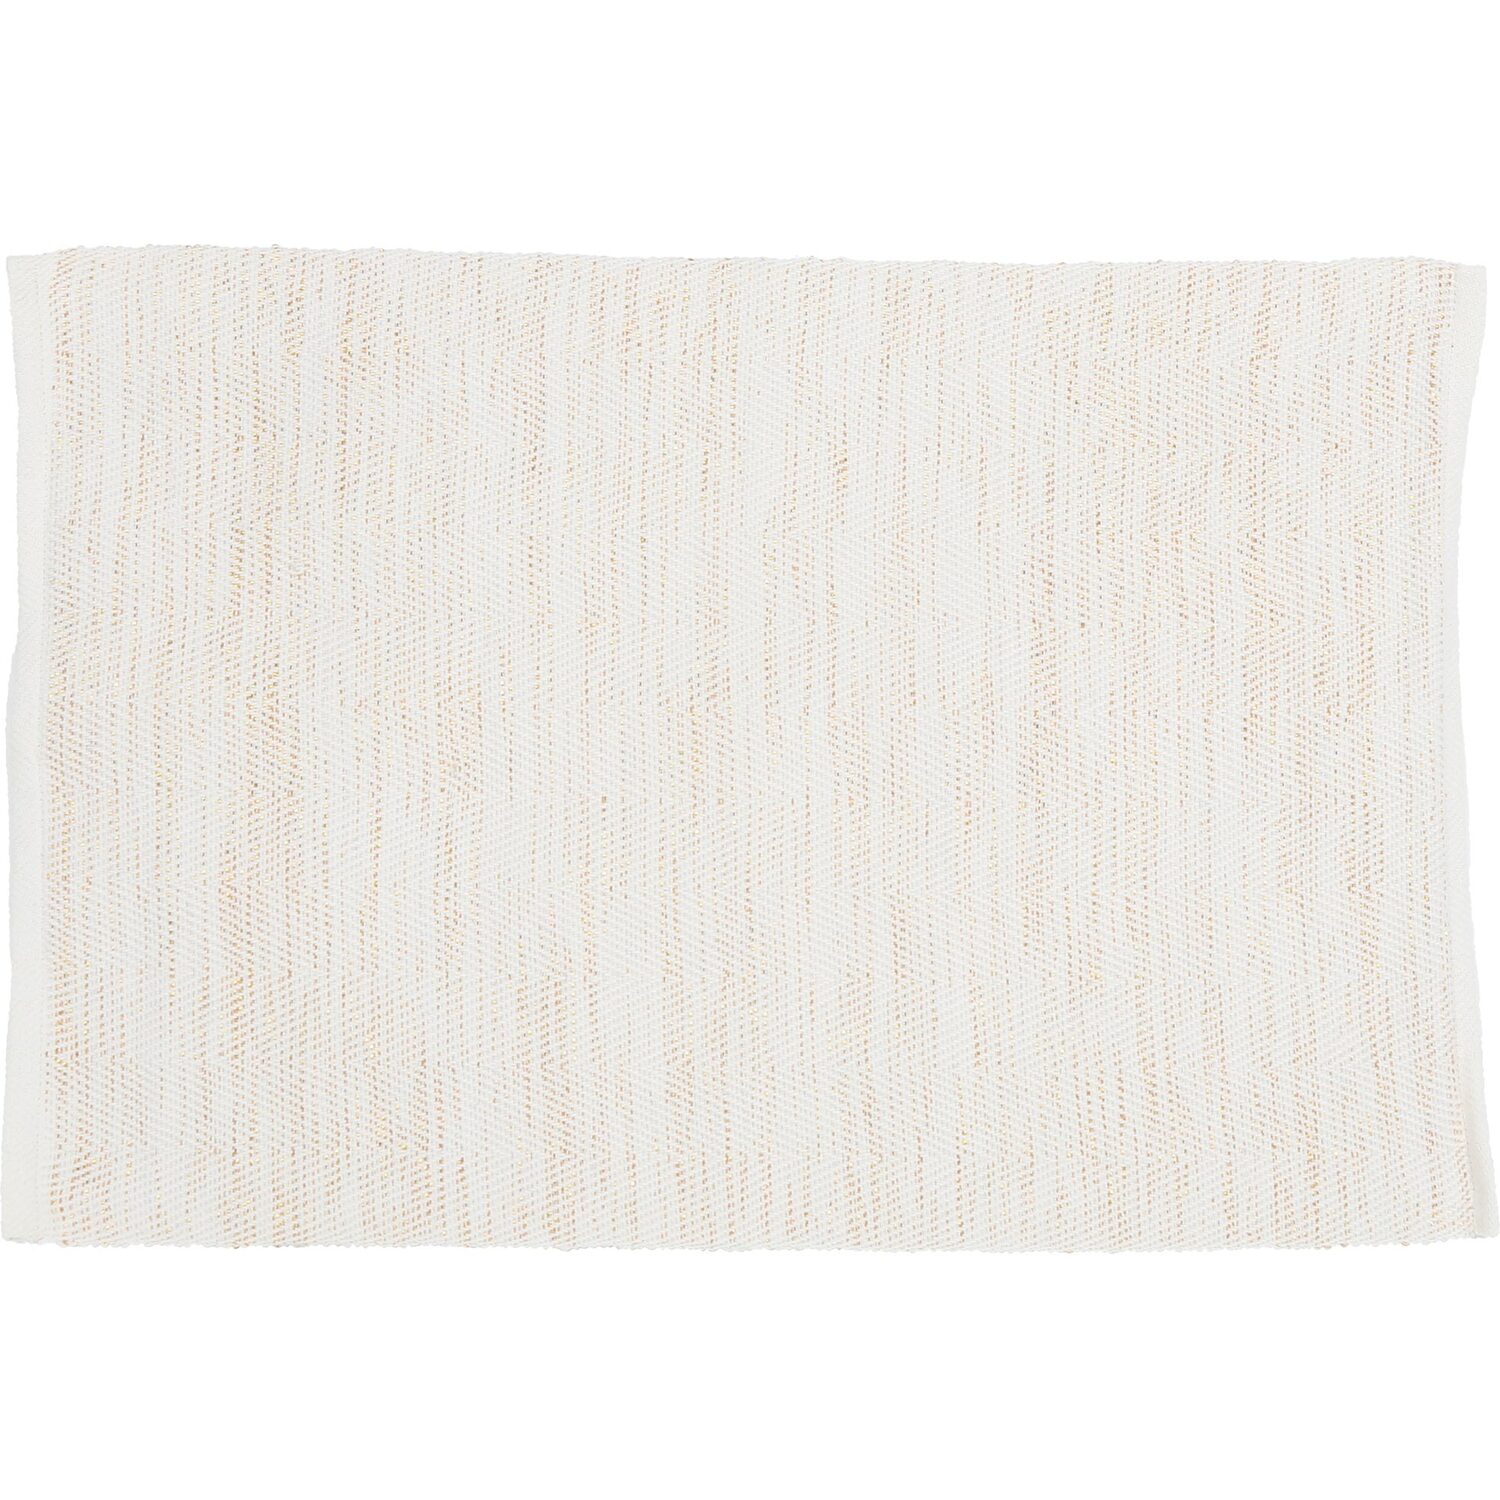 Pack of 2 My Home Placemats - Cream Image 2